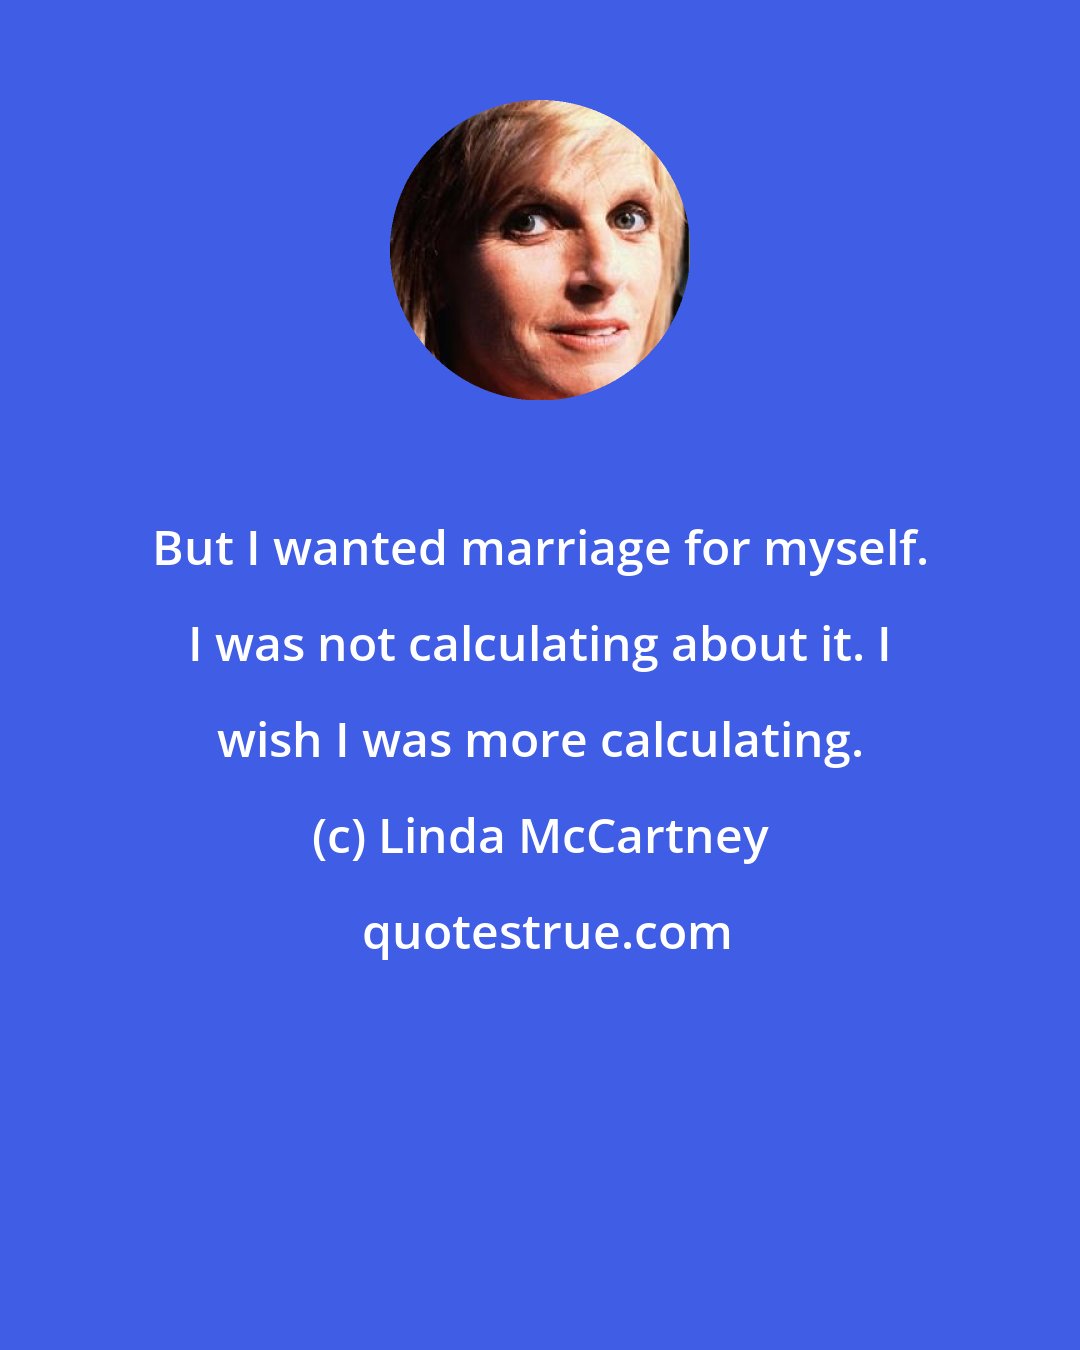 Linda McCartney: But I wanted marriage for myself. I was not calculating about it. I wish I was more calculating.